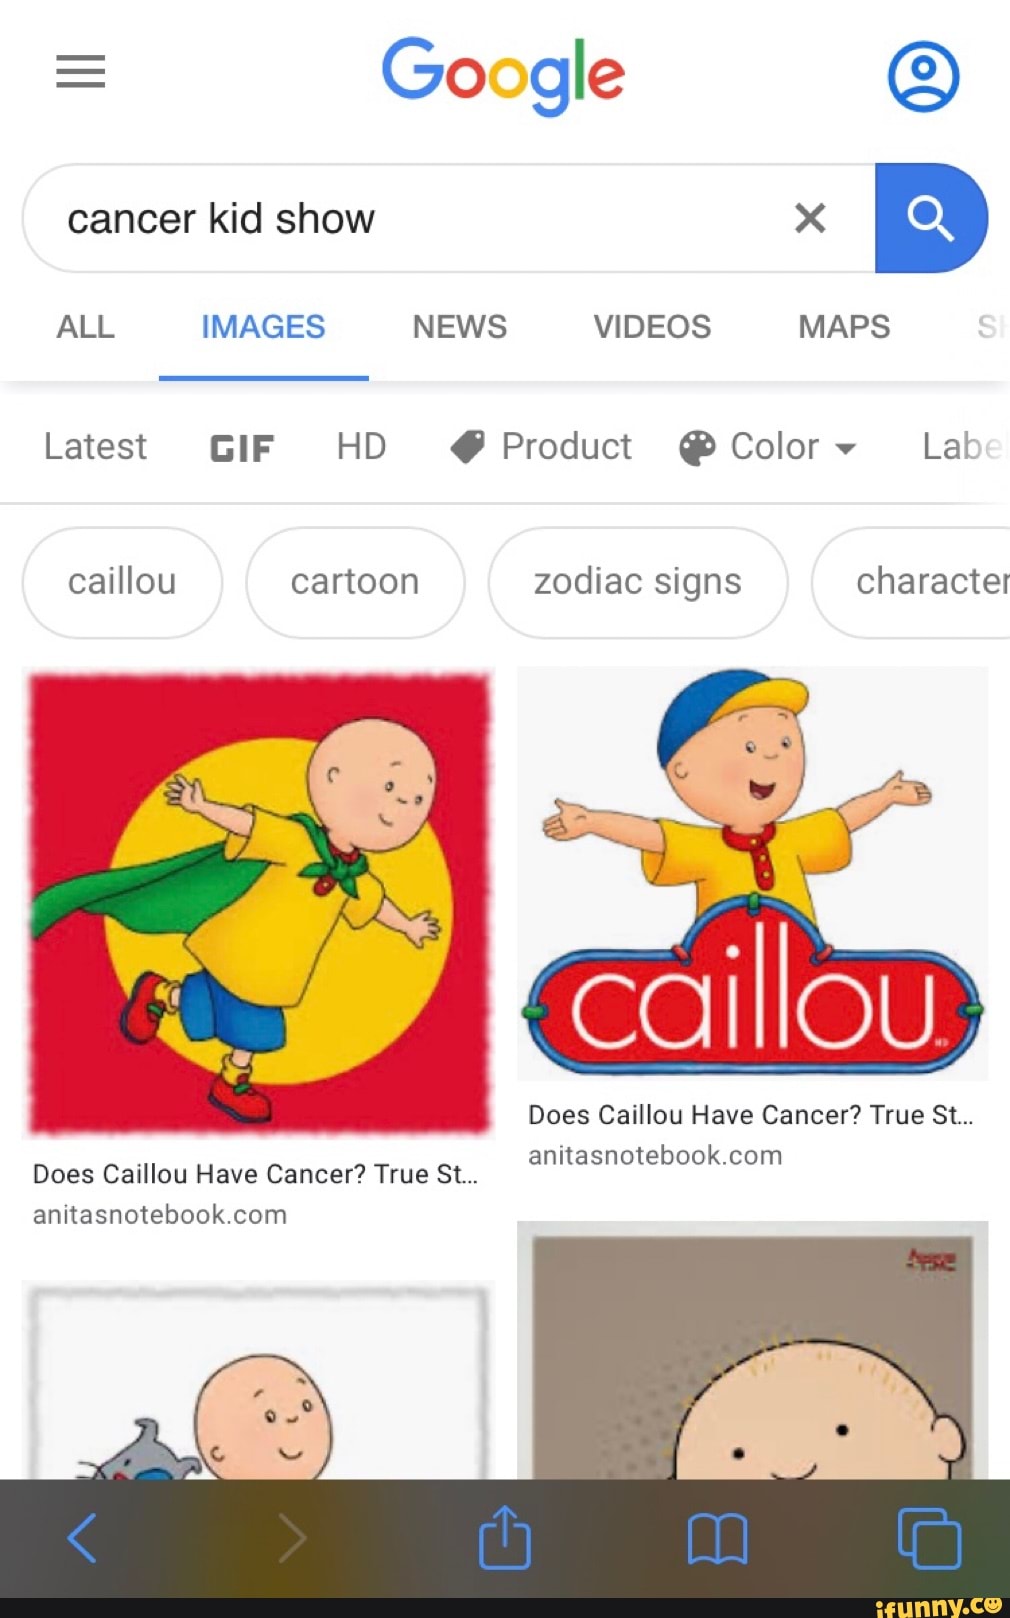 Google O ALL IMAGES NEWS VIDEOS MAPS caillou cartoon zodiac signs characte!  Does Caillou Have Cancer? True St...  Does Caillou Have  Cancer? True St...  